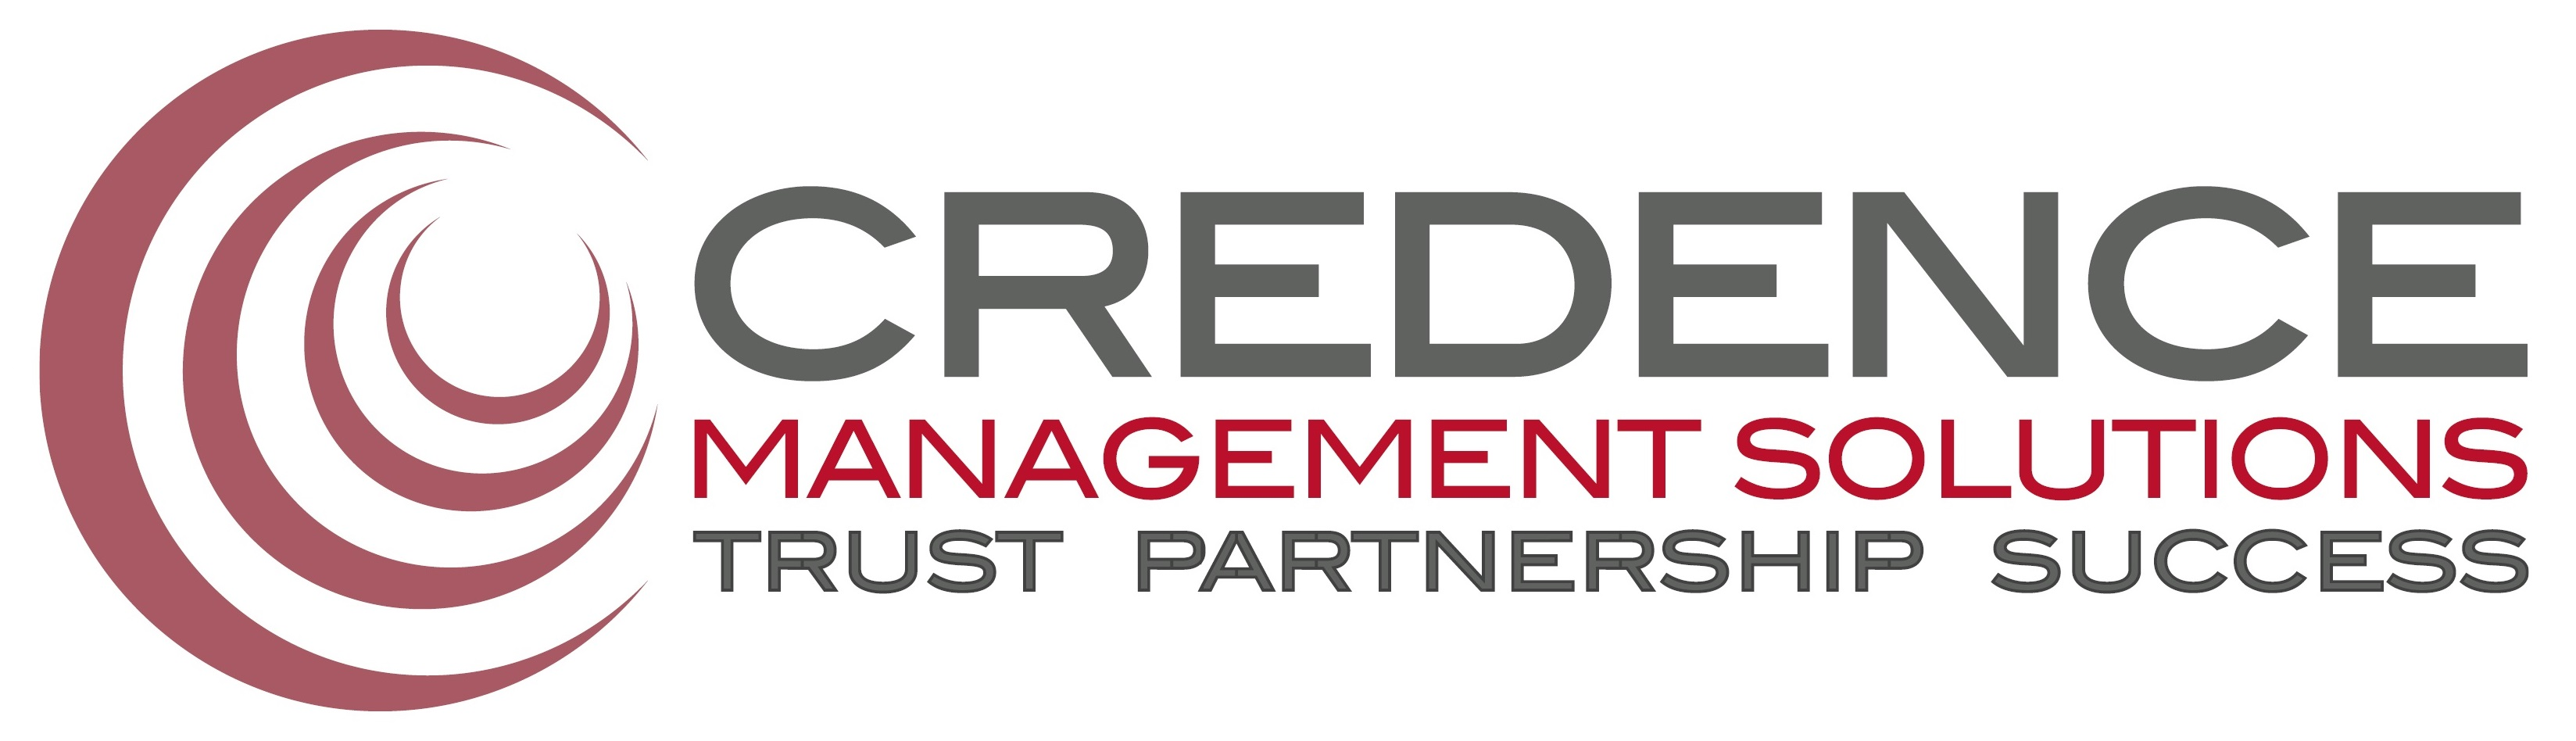 Credence Management Solutions Company Logo